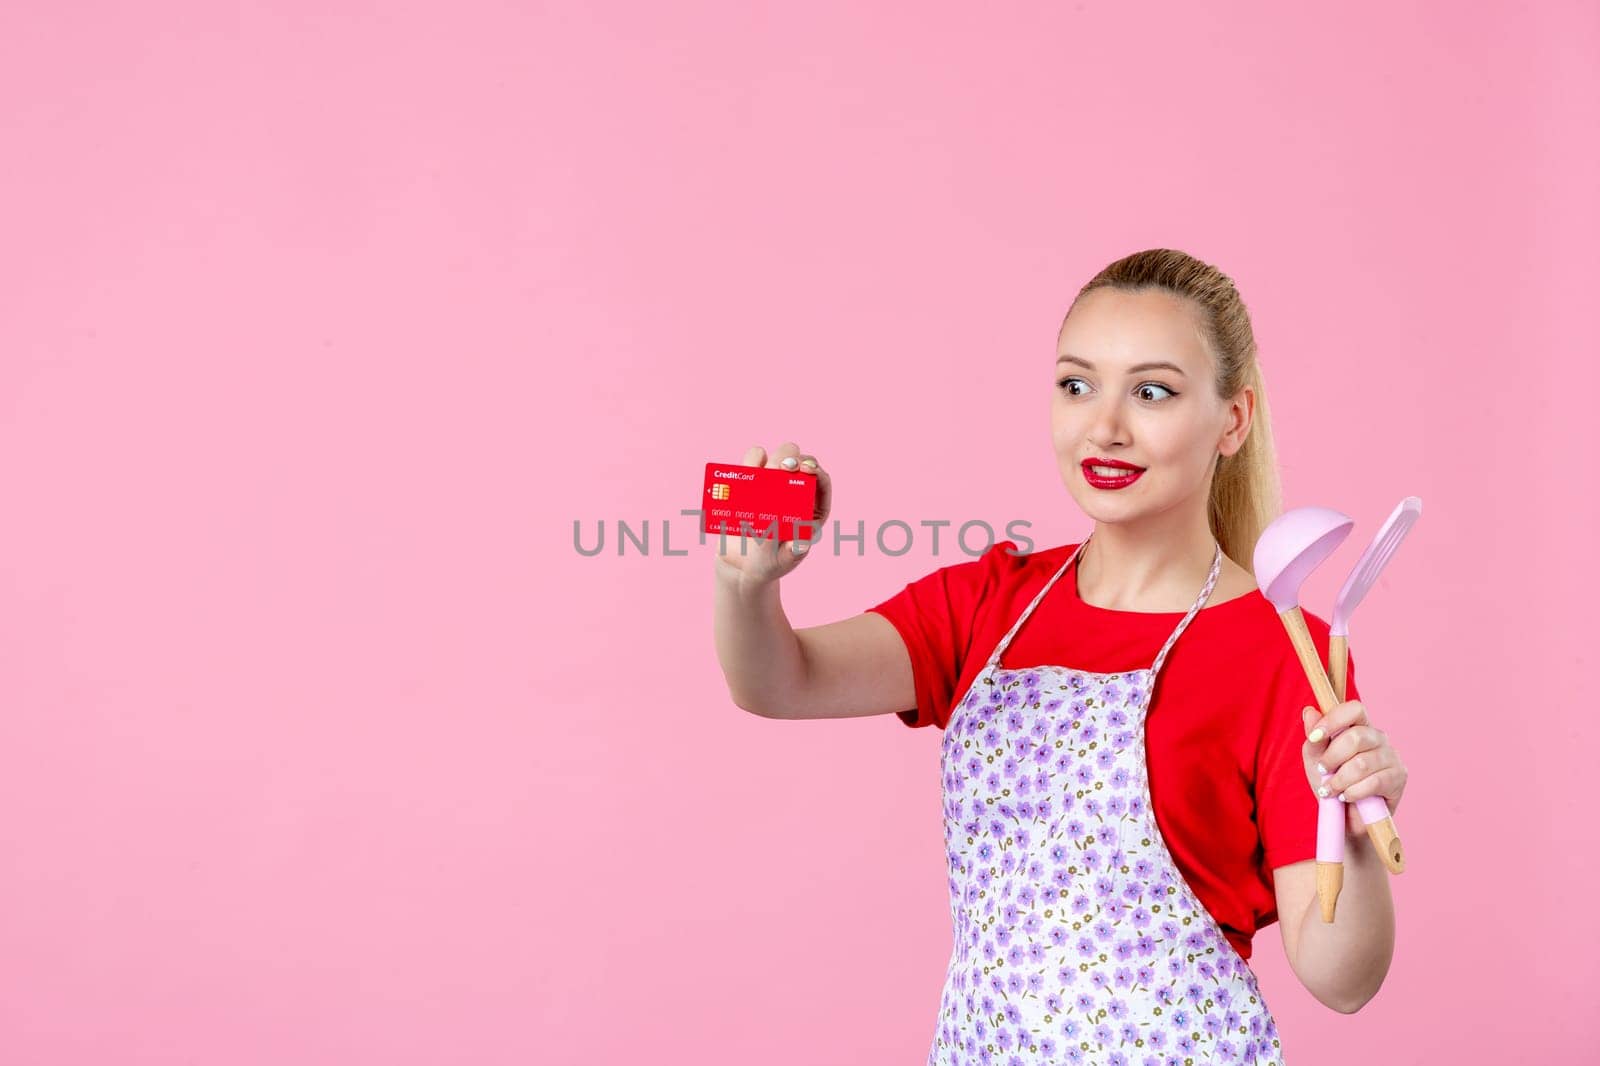 front view young housewife in cape holding spoons and bank card on pink background occupation duty worker horizontal wife profession uniform job cutlery